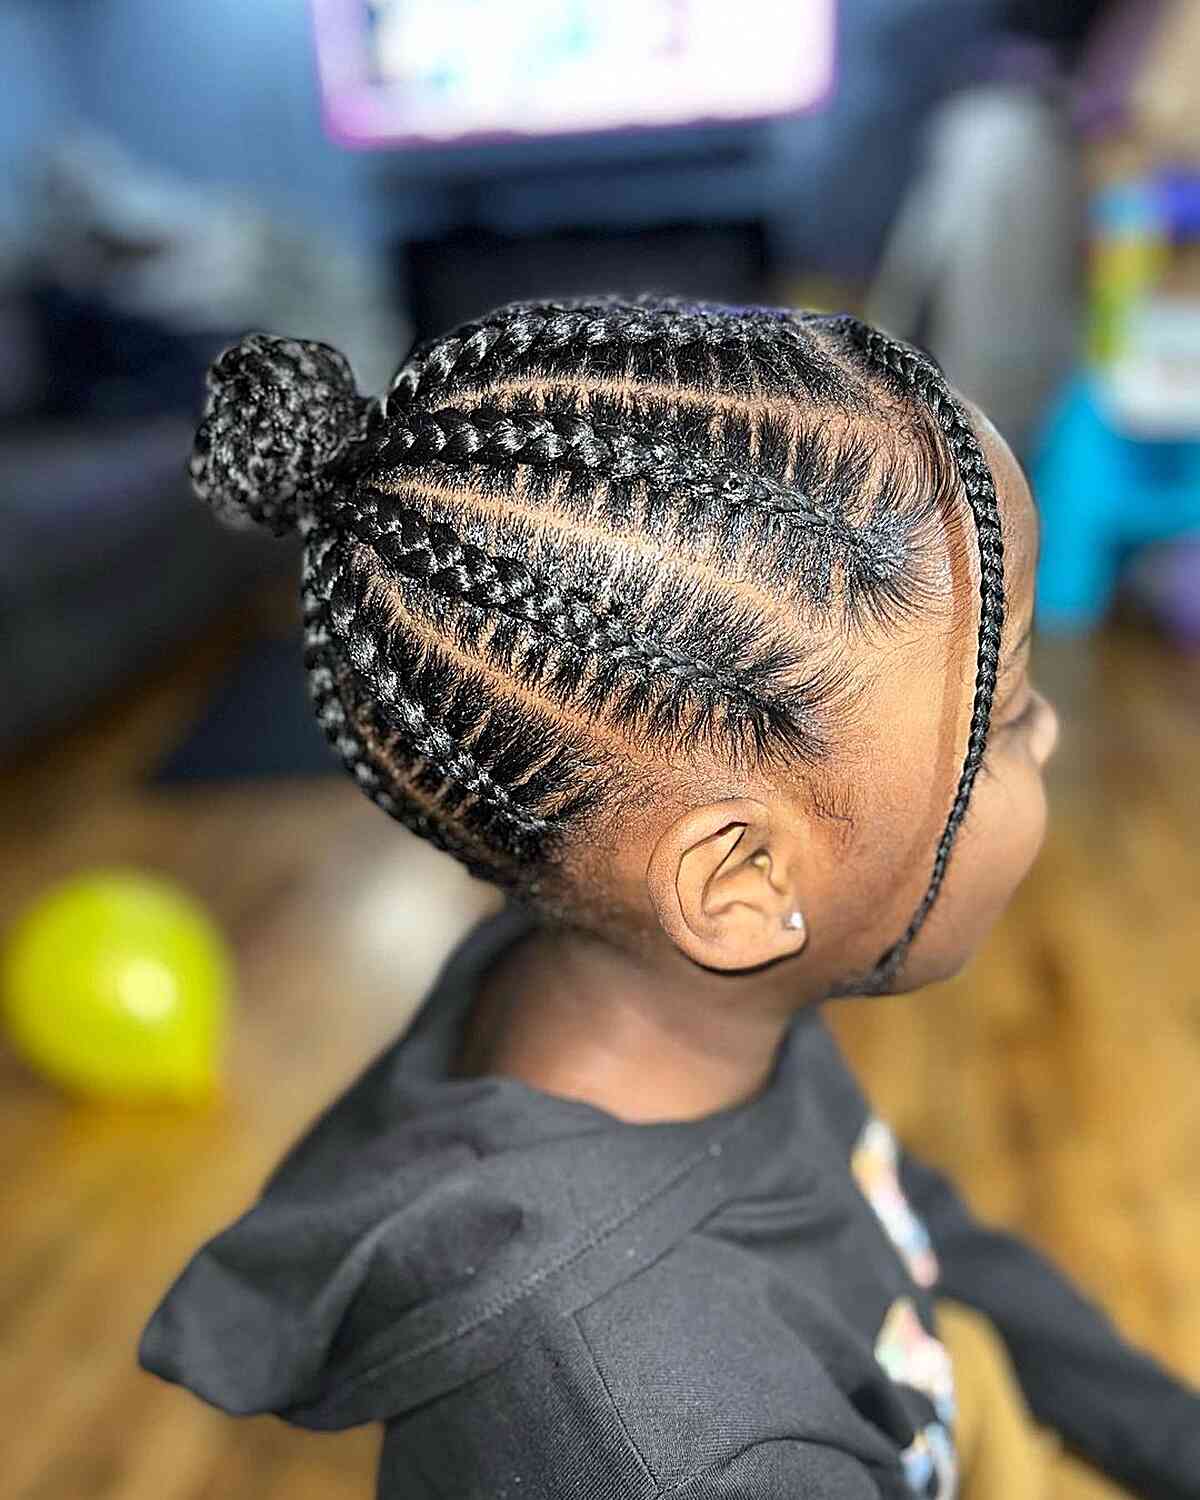 20 Easy Hairstyles for Black Girls 2023 - Natural Hairstyles for Kids